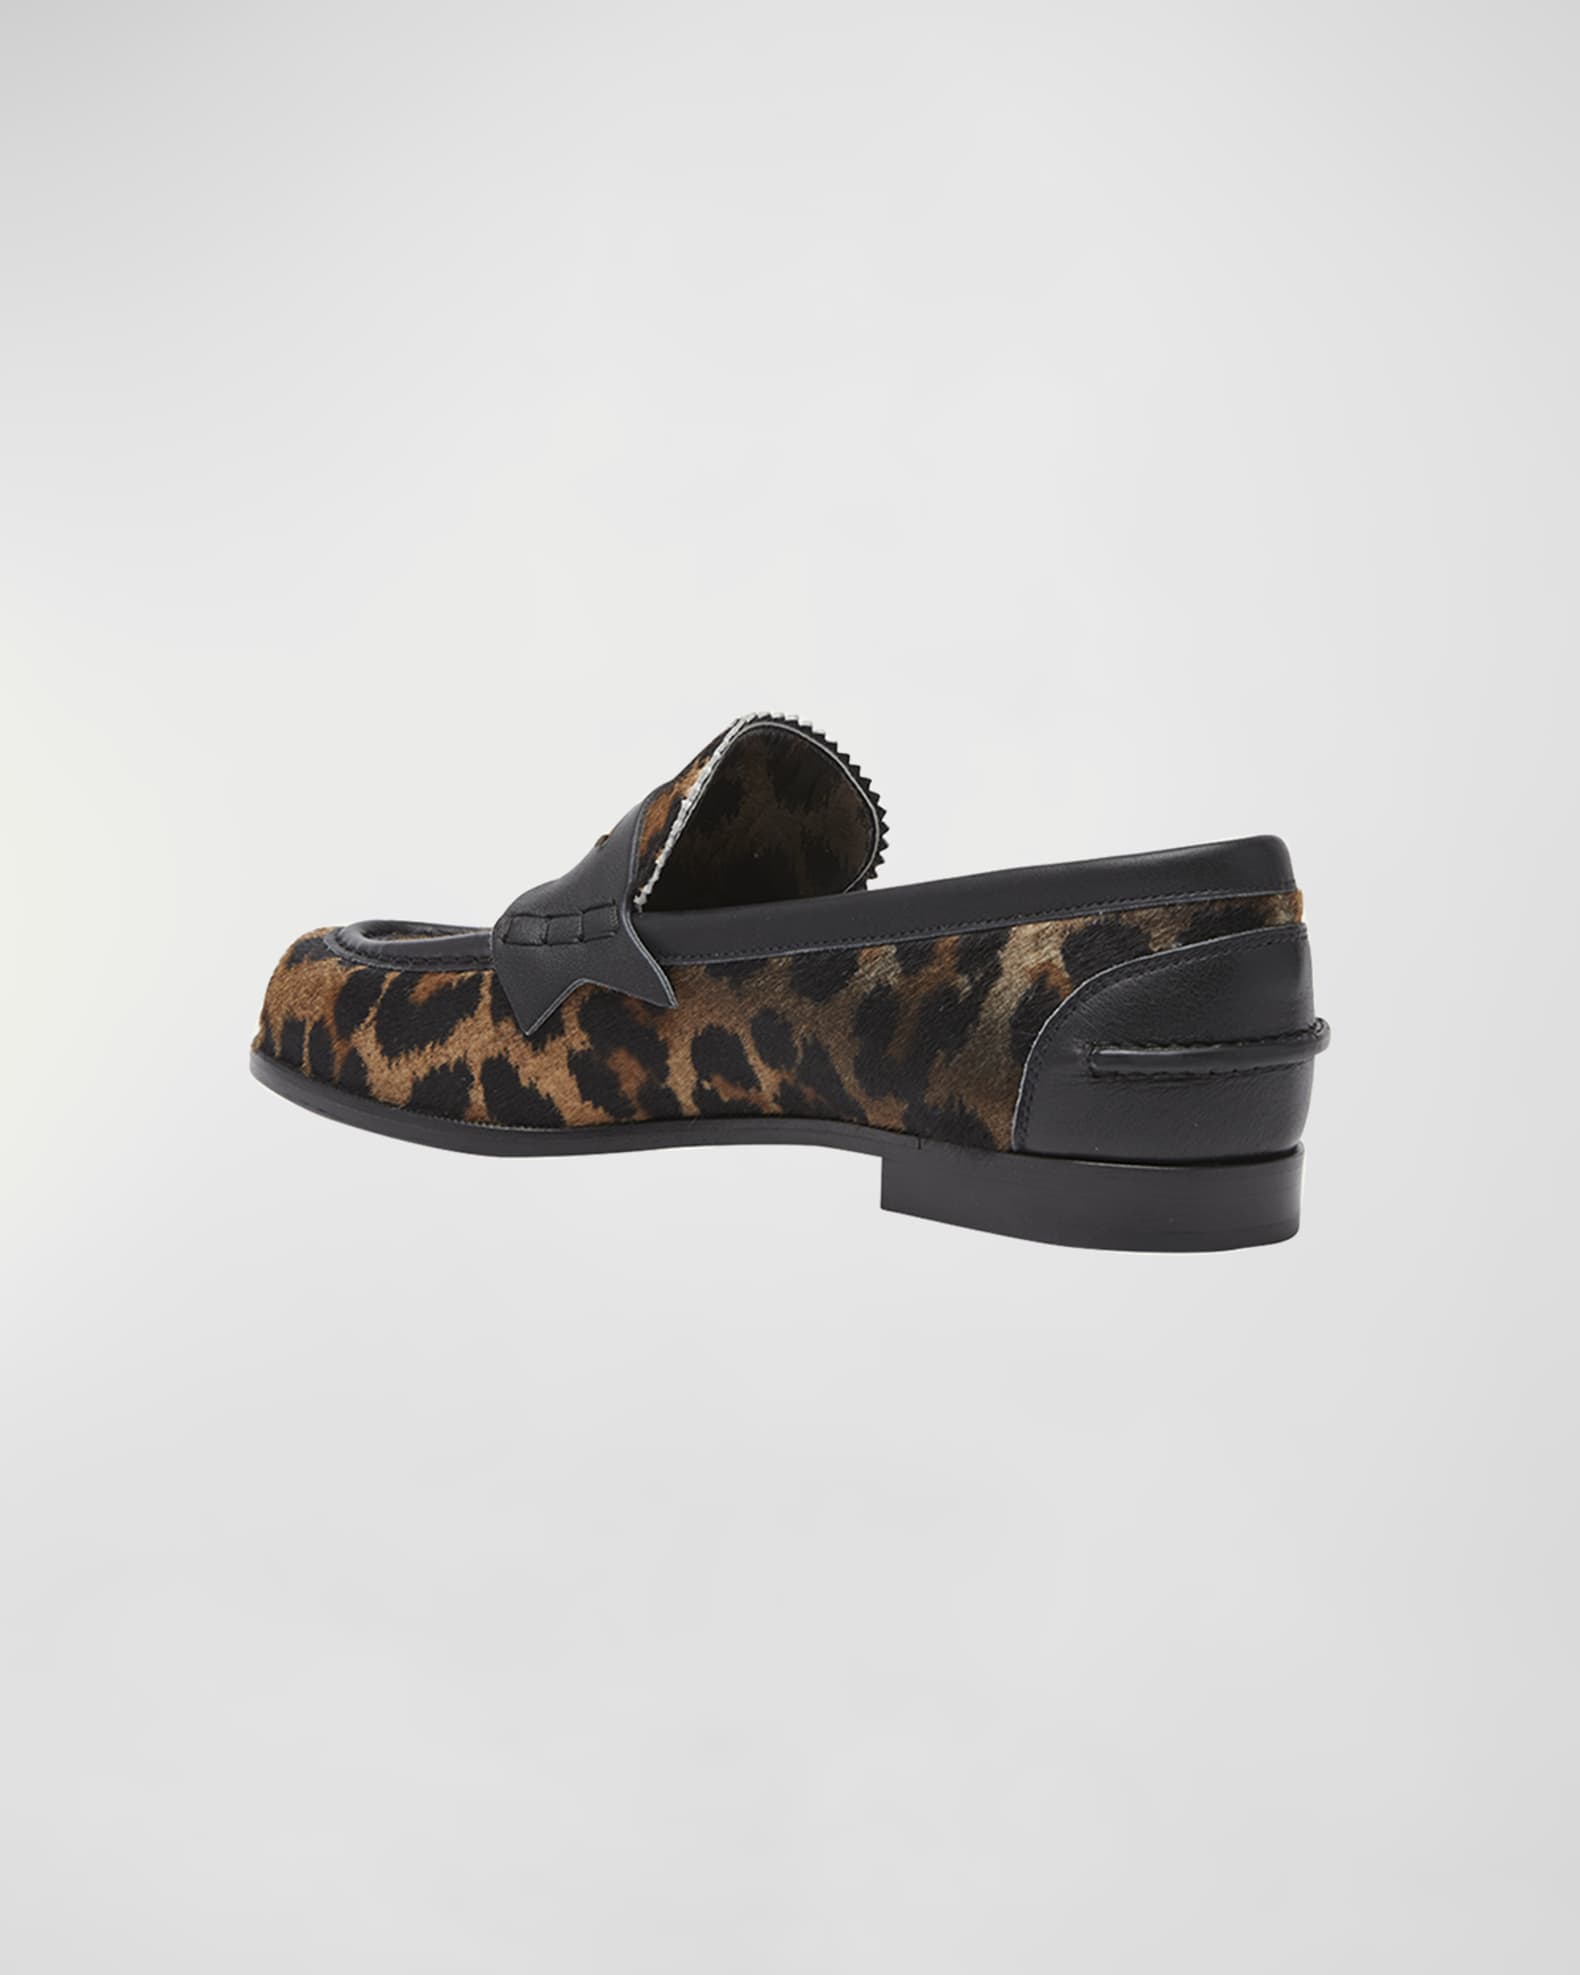 J. Crew, Shoes, J Crew Academy Loafers Leopard Print